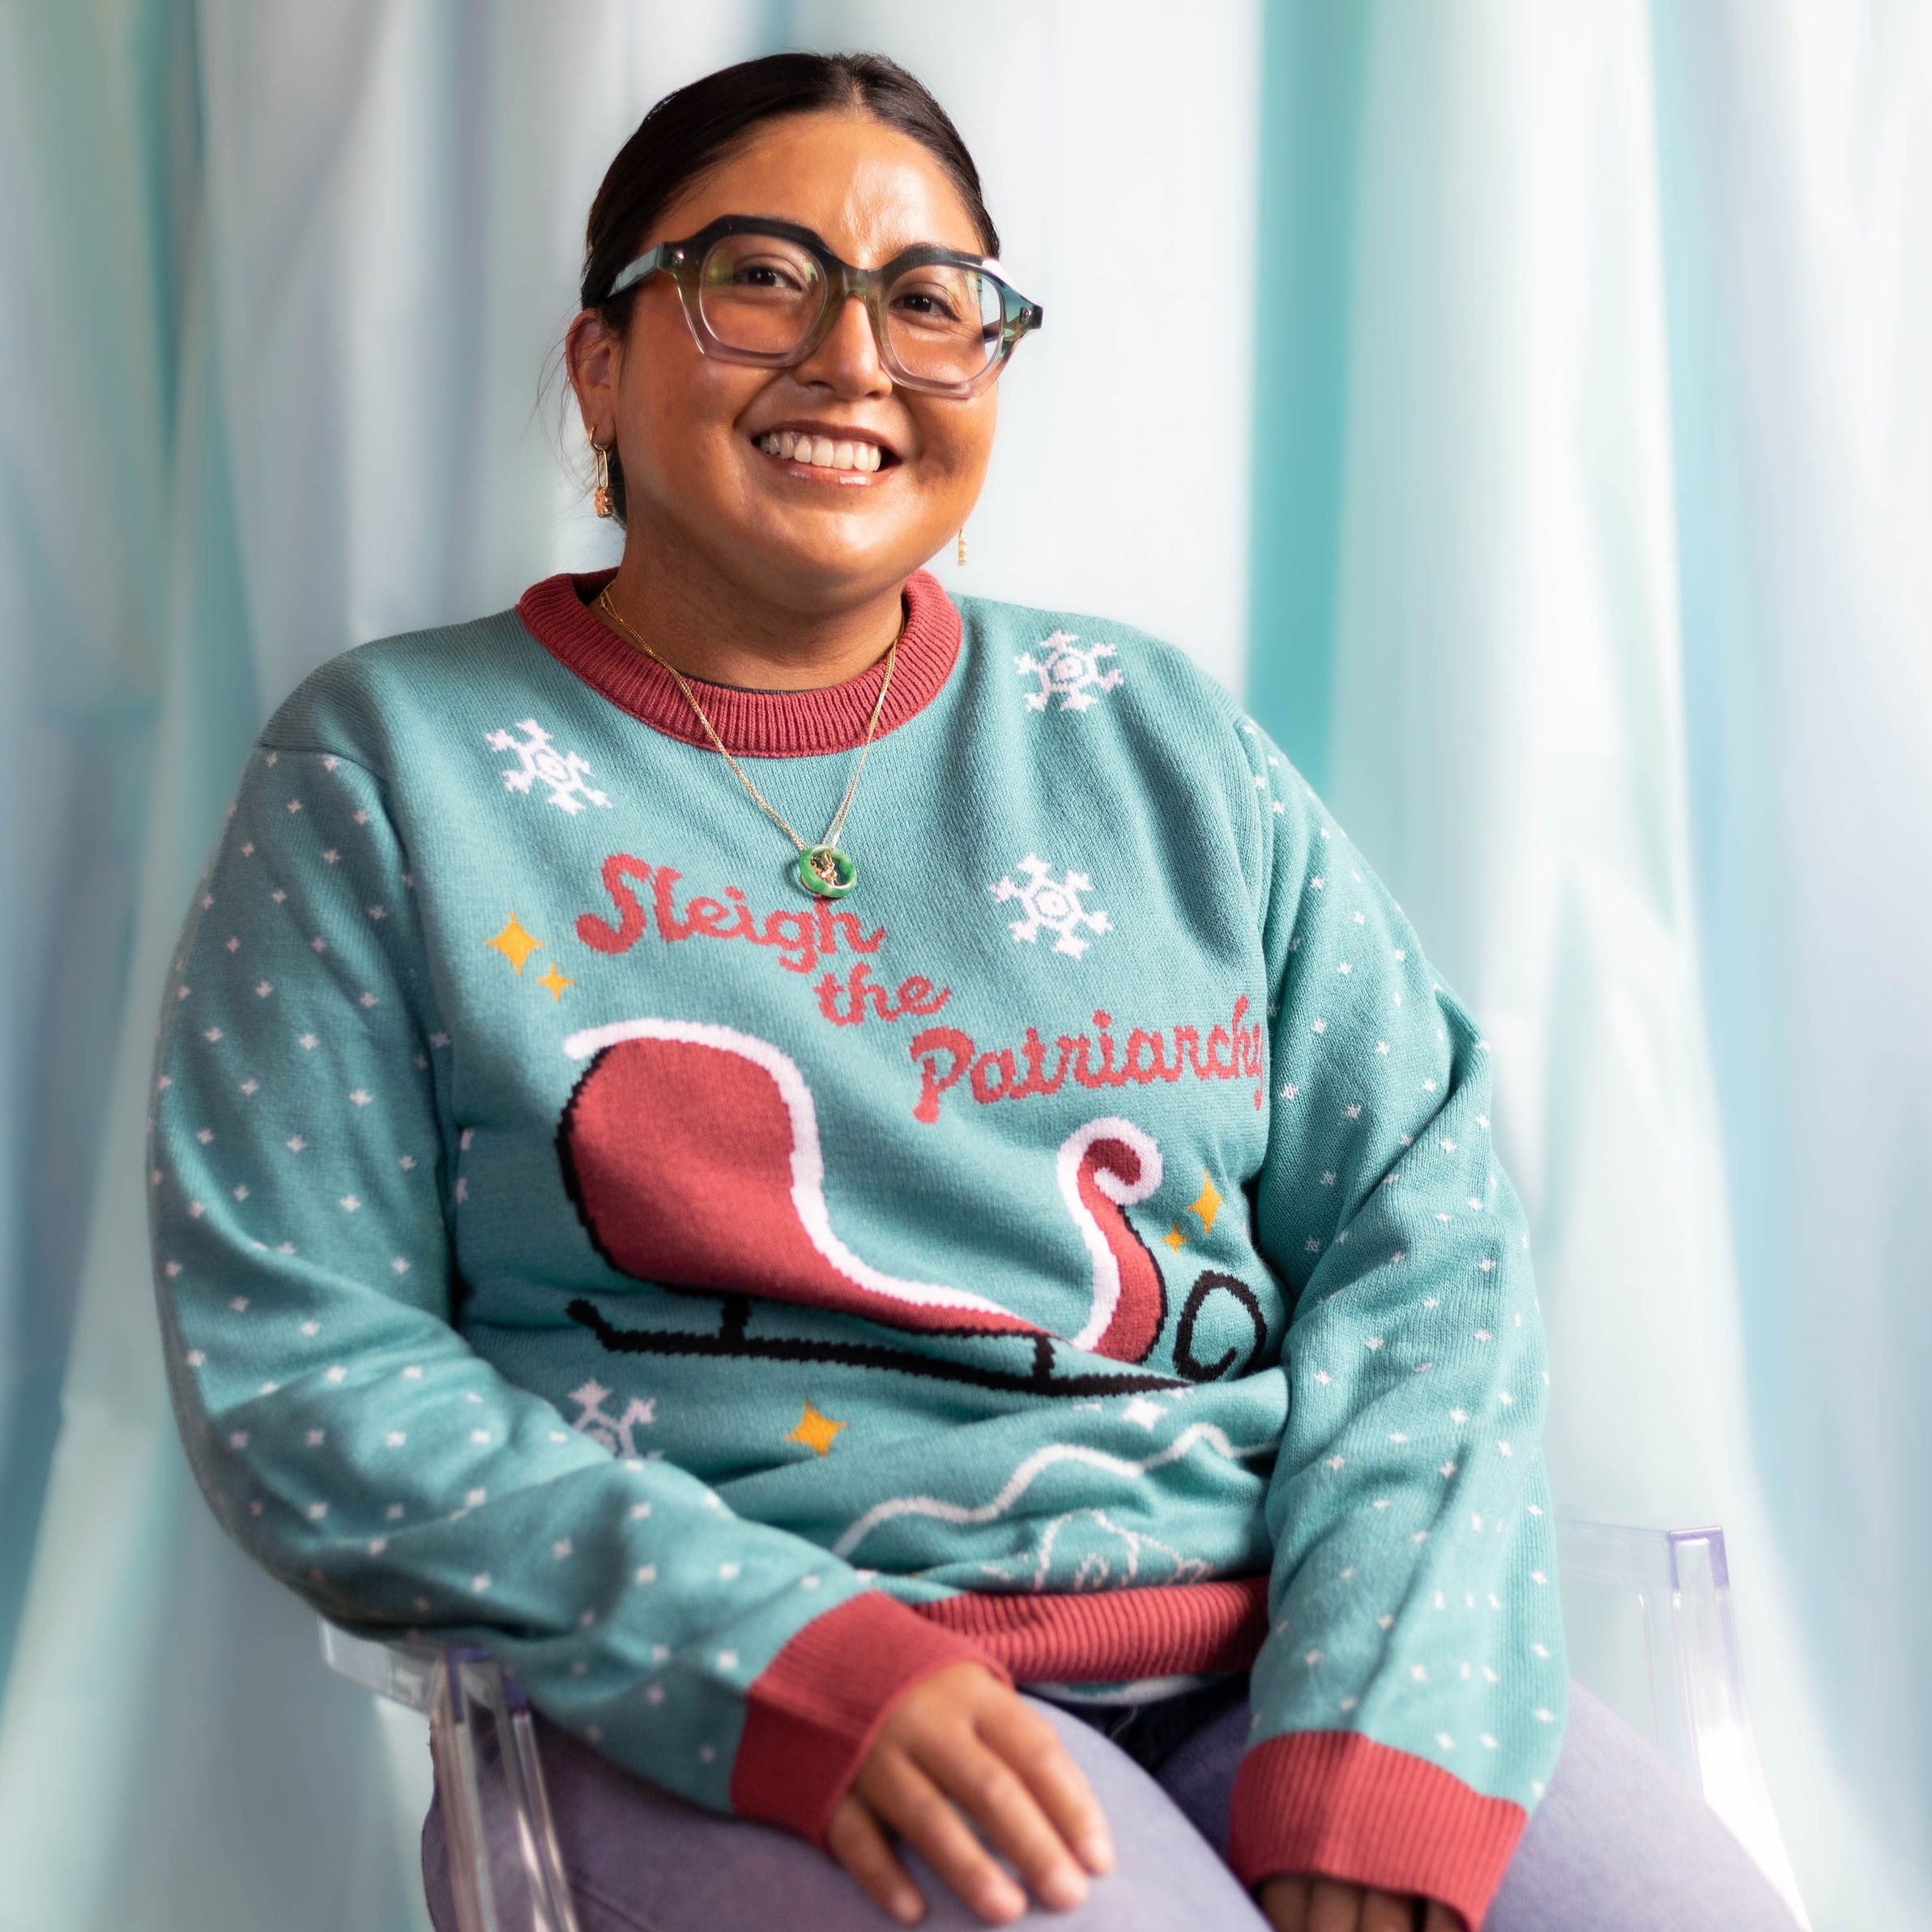 A person wearing the Sleigh The Patriarchy Holiday Sweater. There is an ice blue background.